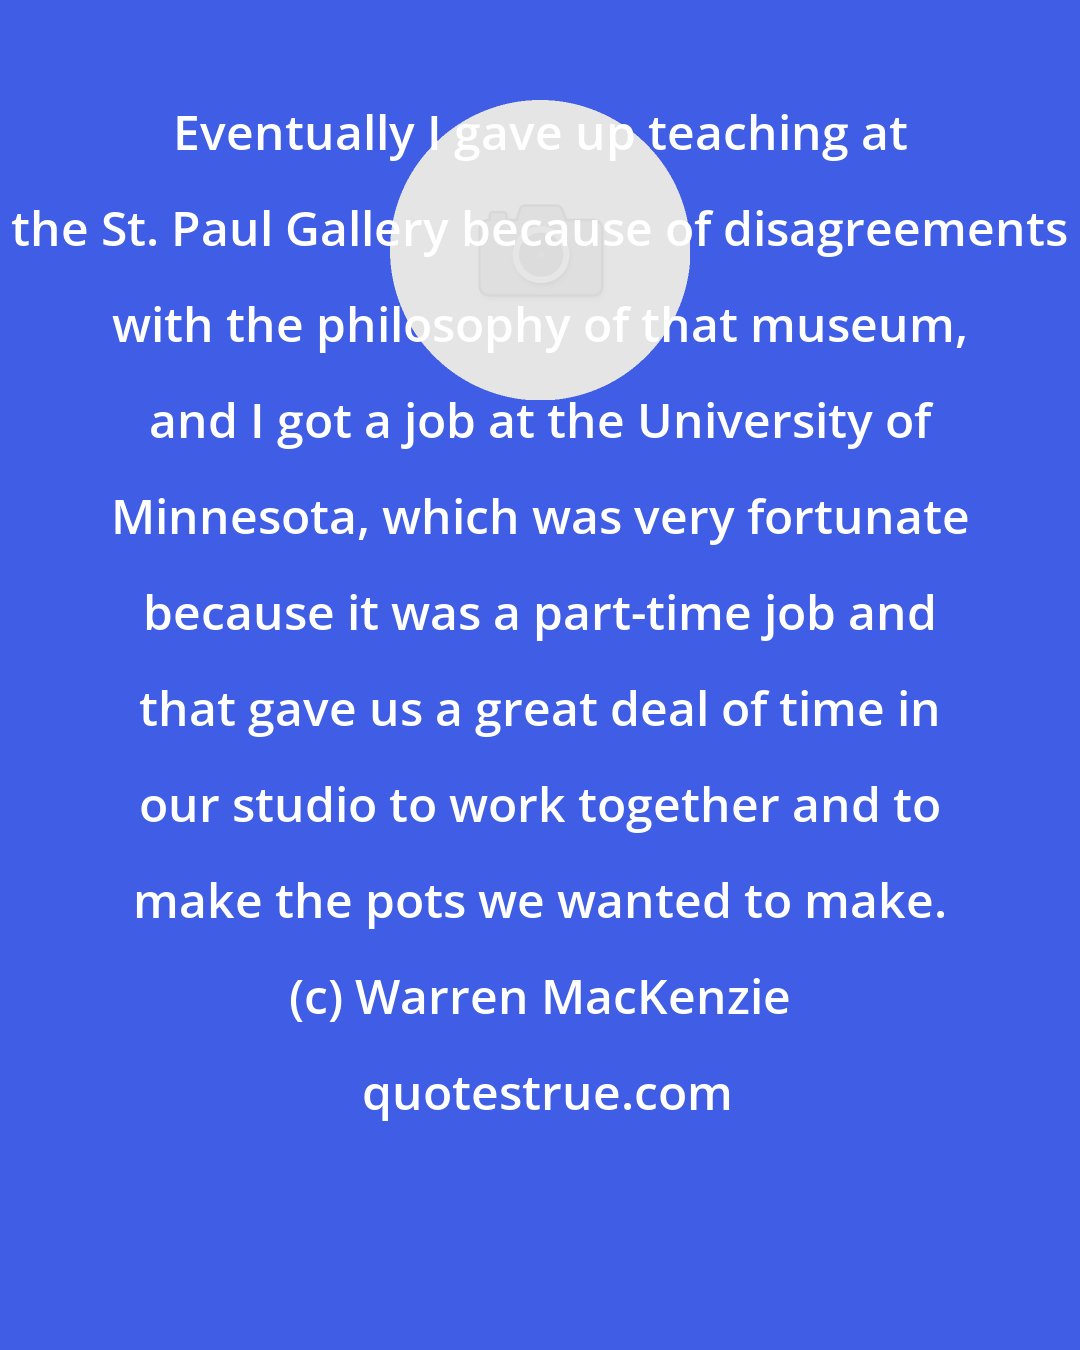 Warren MacKenzie: Eventually I gave up teaching at the St. Paul Gallery because of disagreements with the philosophy of that museum, and I got a job at the University of Minnesota, which was very fortunate because it was a part-time job and that gave us a great deal of time in our studio to work together and to make the pots we wanted to make.